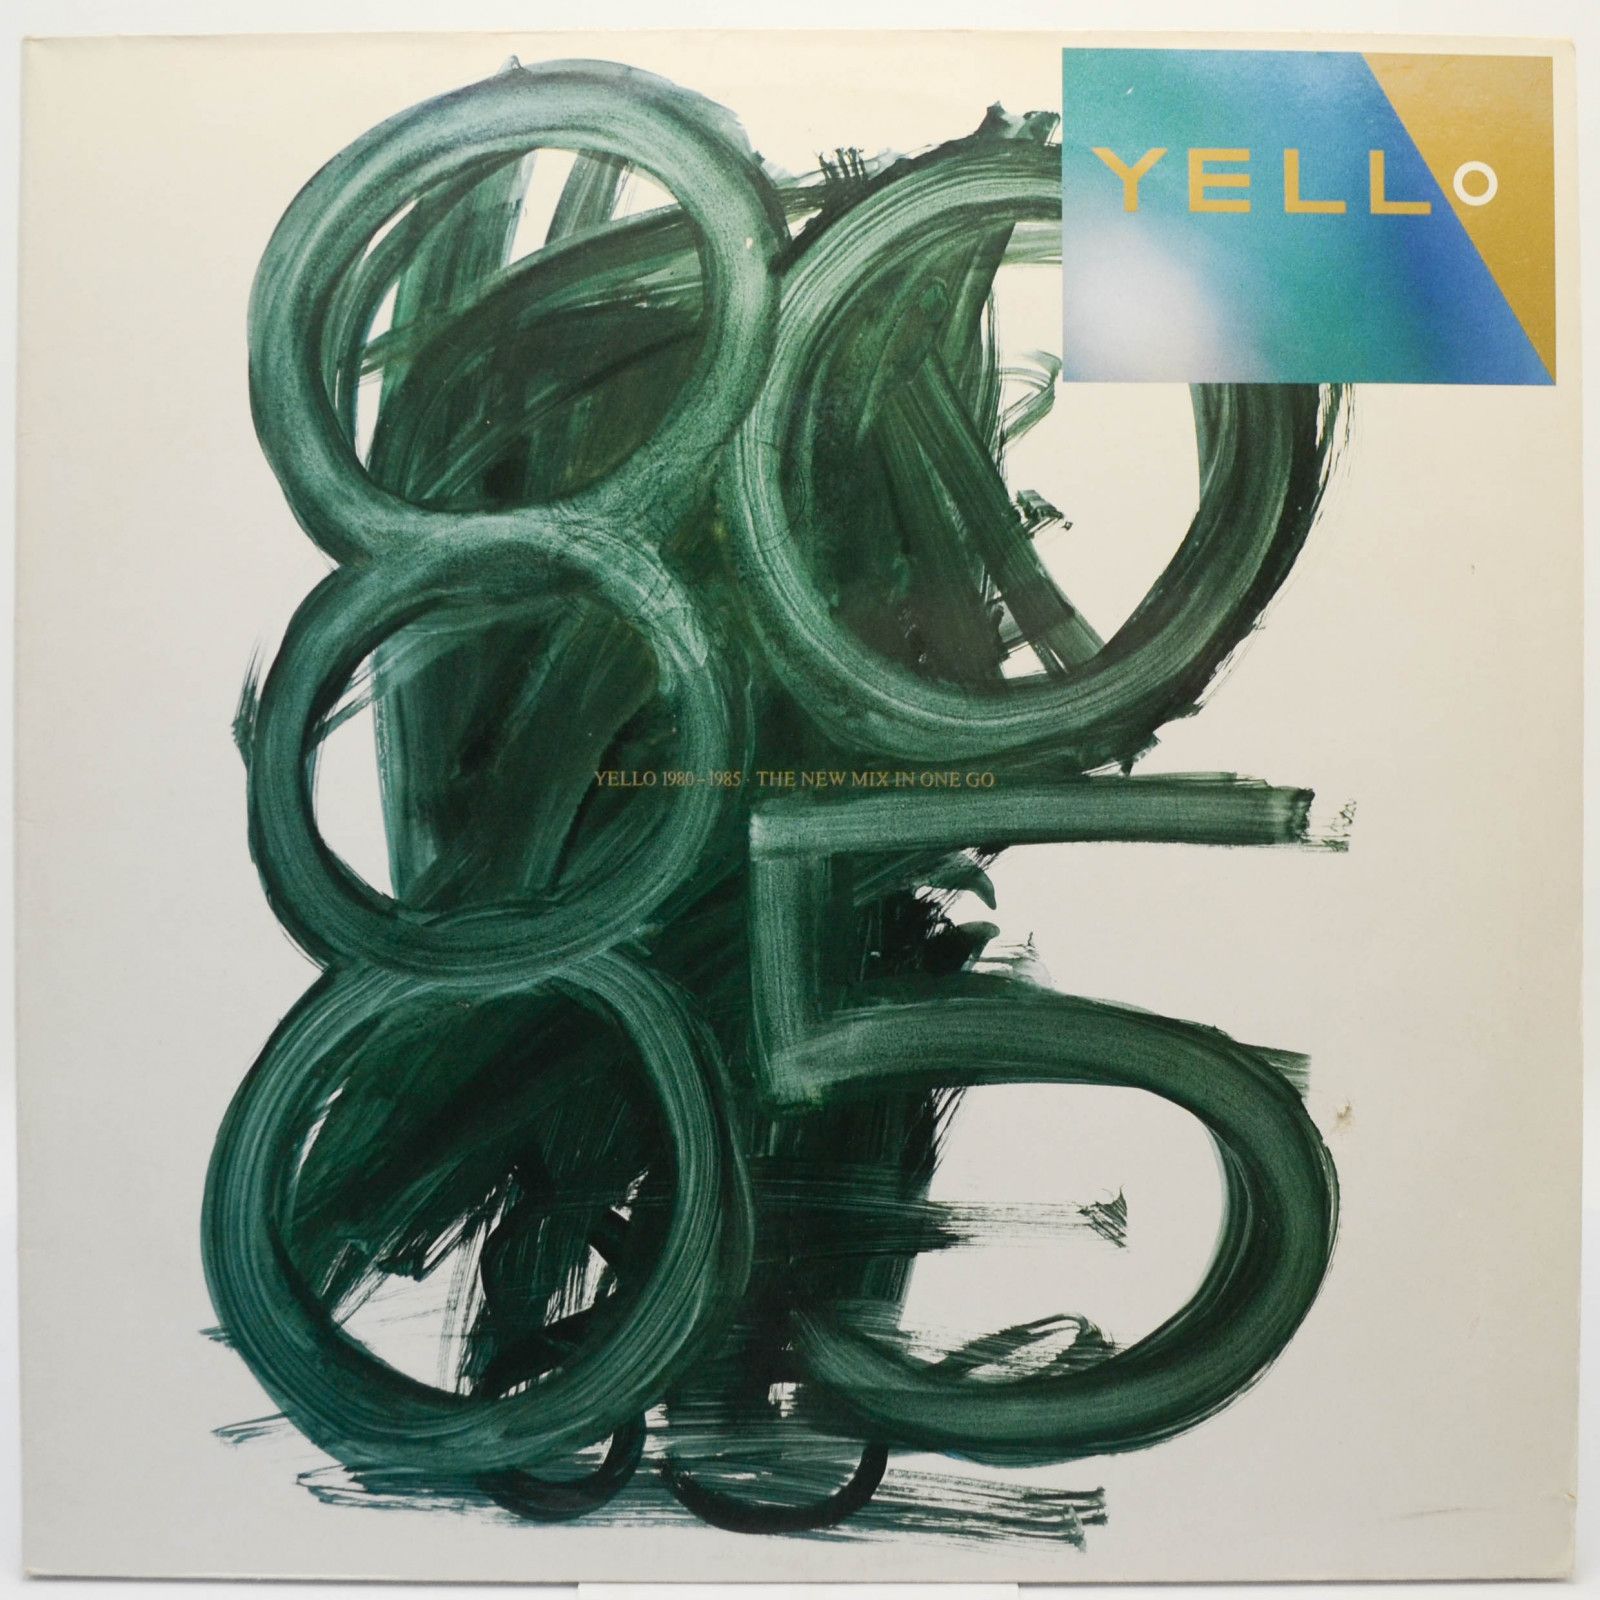 Yello — 1980 - 1985 The New Mix In One Go (2LP), 1986